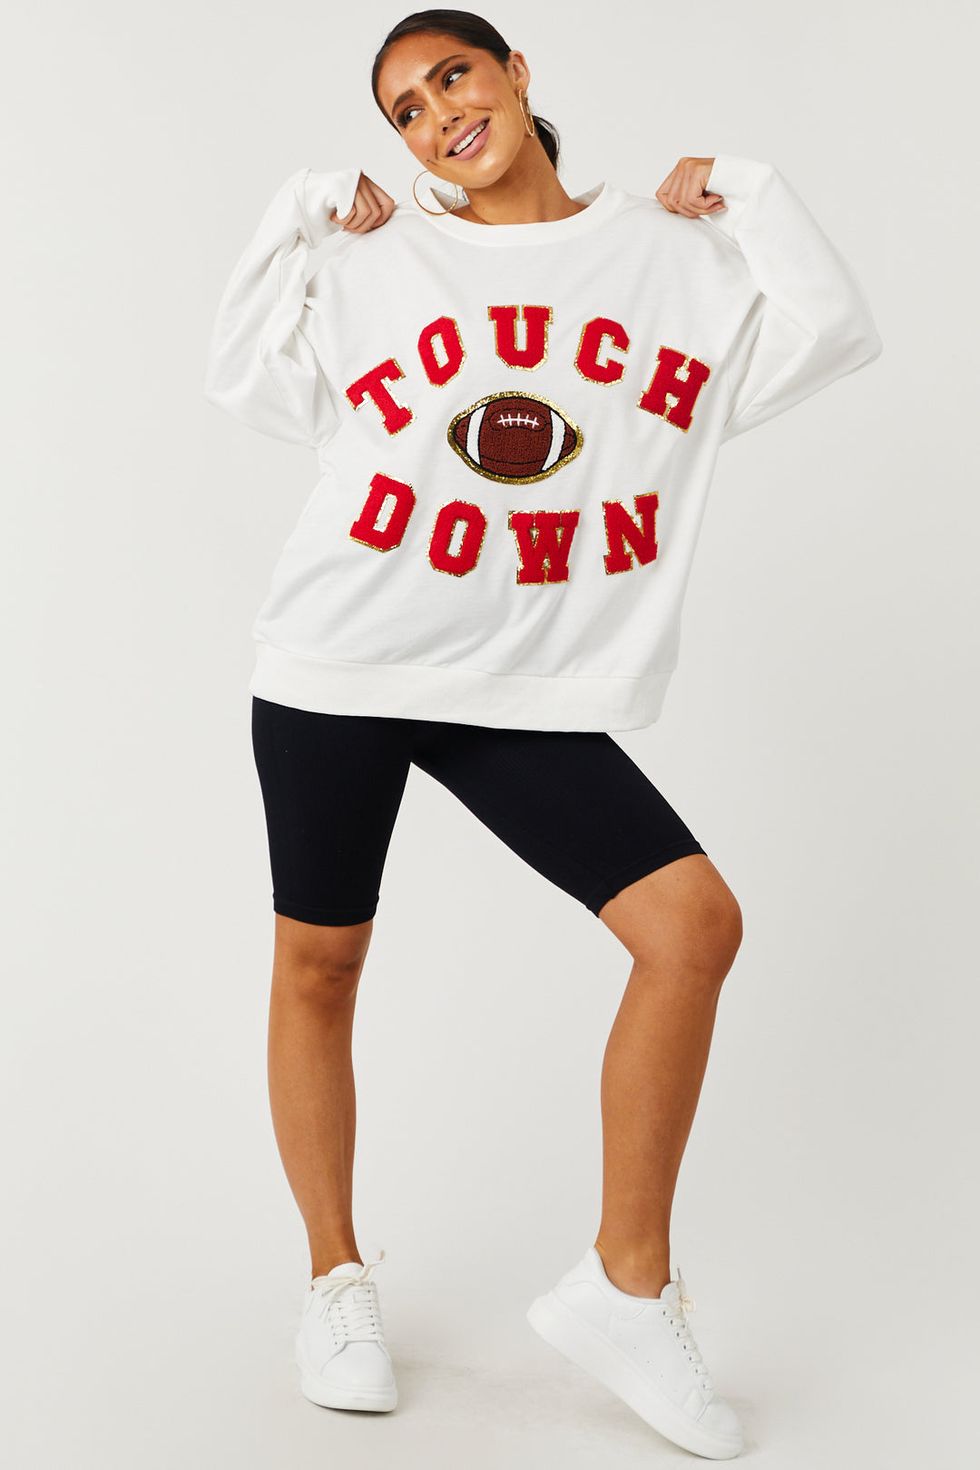 2023* 20 chic ways to rock football jersey outfits for girls!